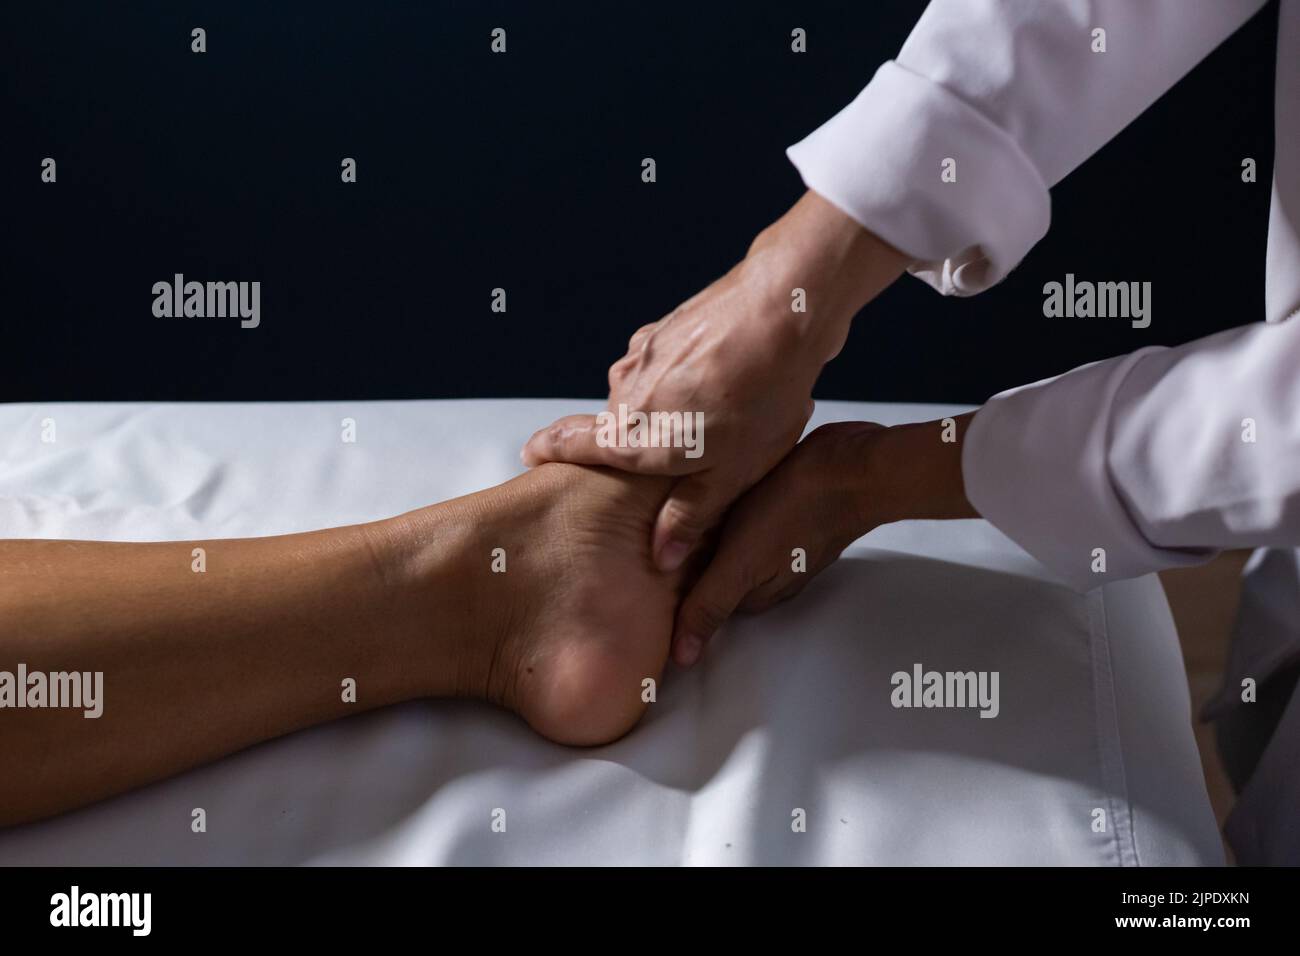 Goiânia, Goias, Brazil – July 18, 2022: Detail of masseuse hands applying therapeutic massage on the foot of a patient who is lying. Stock Photo